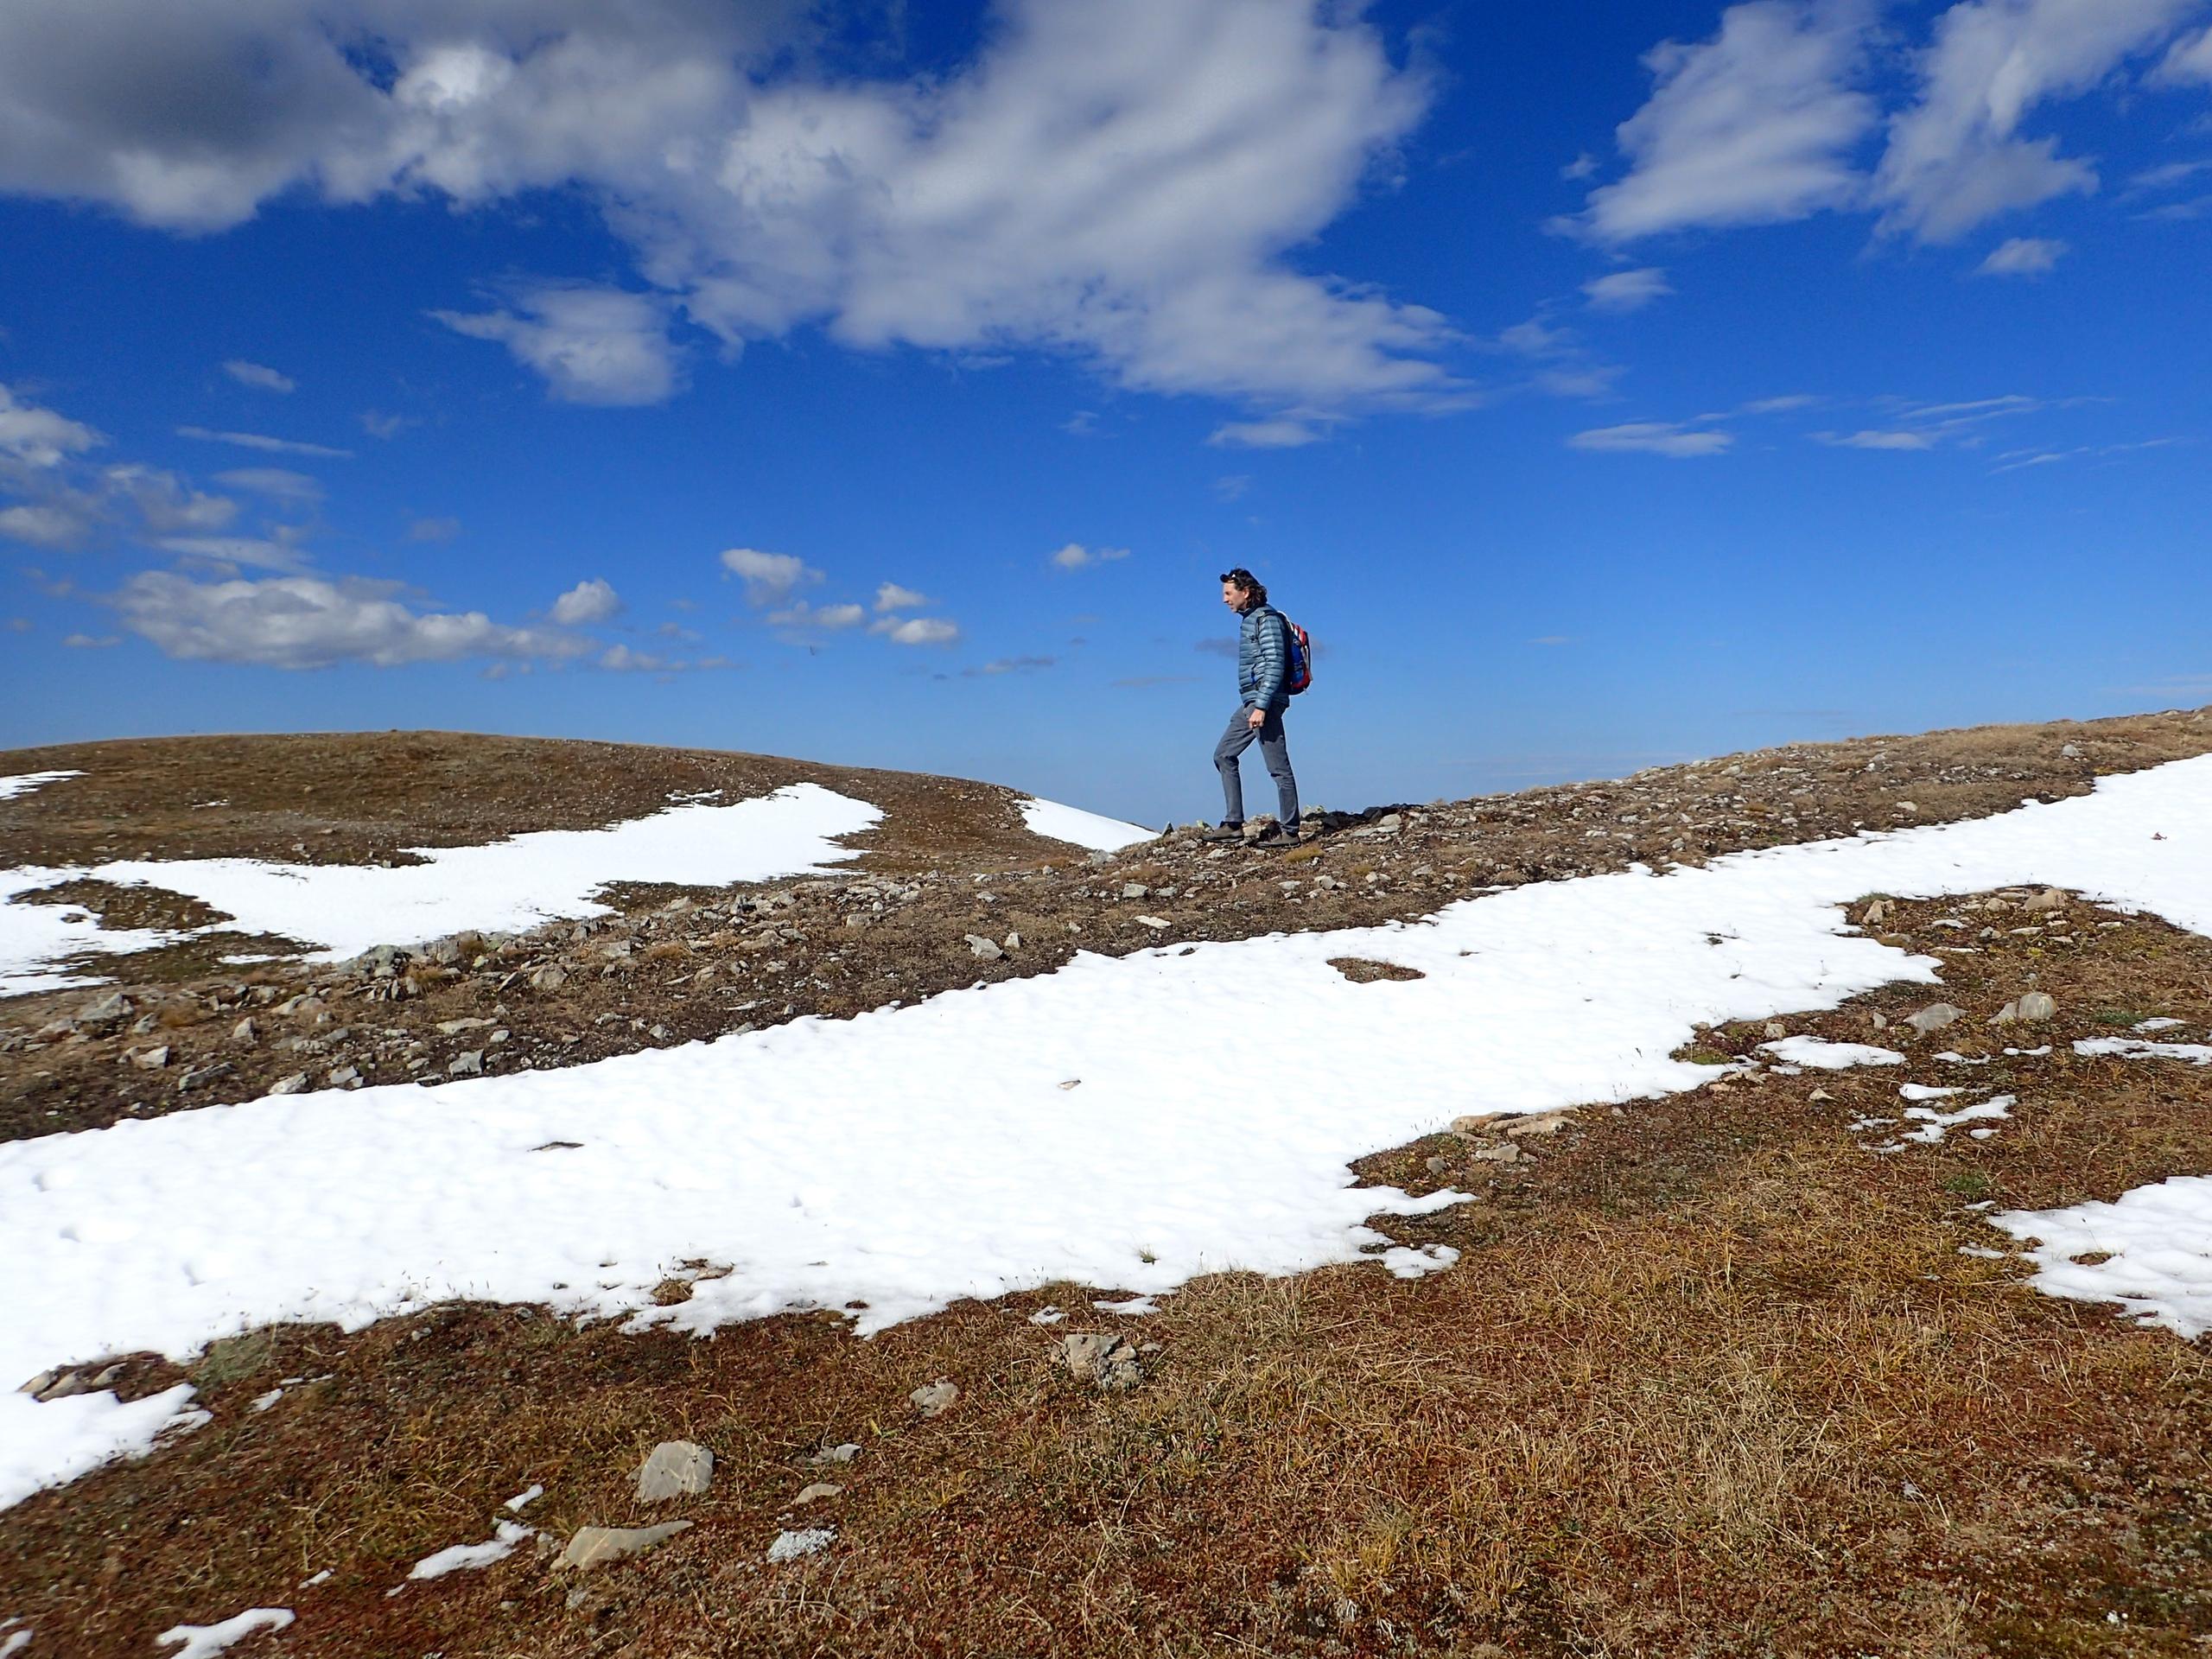 Man walking along mountain ridge, amid rock and snow patches